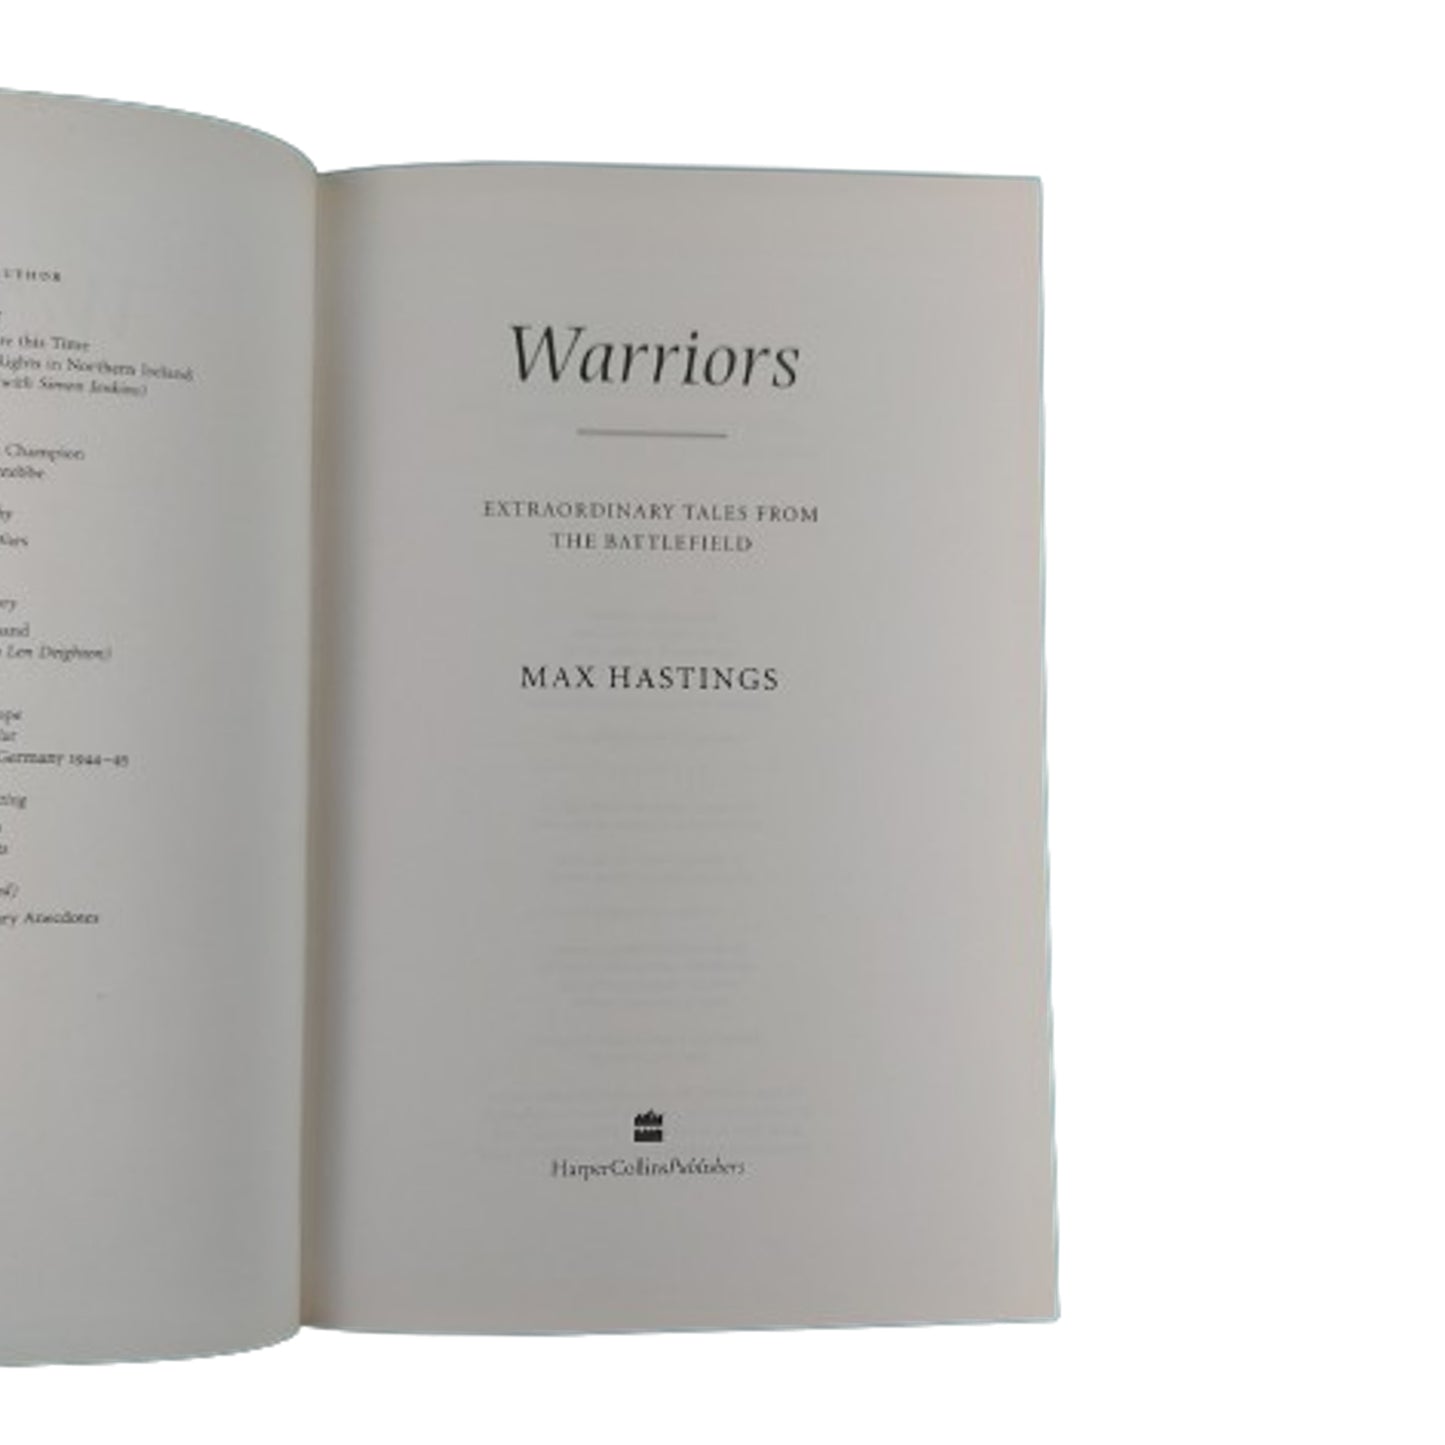 Warriors -Extraordinary Tales From The Battlefield